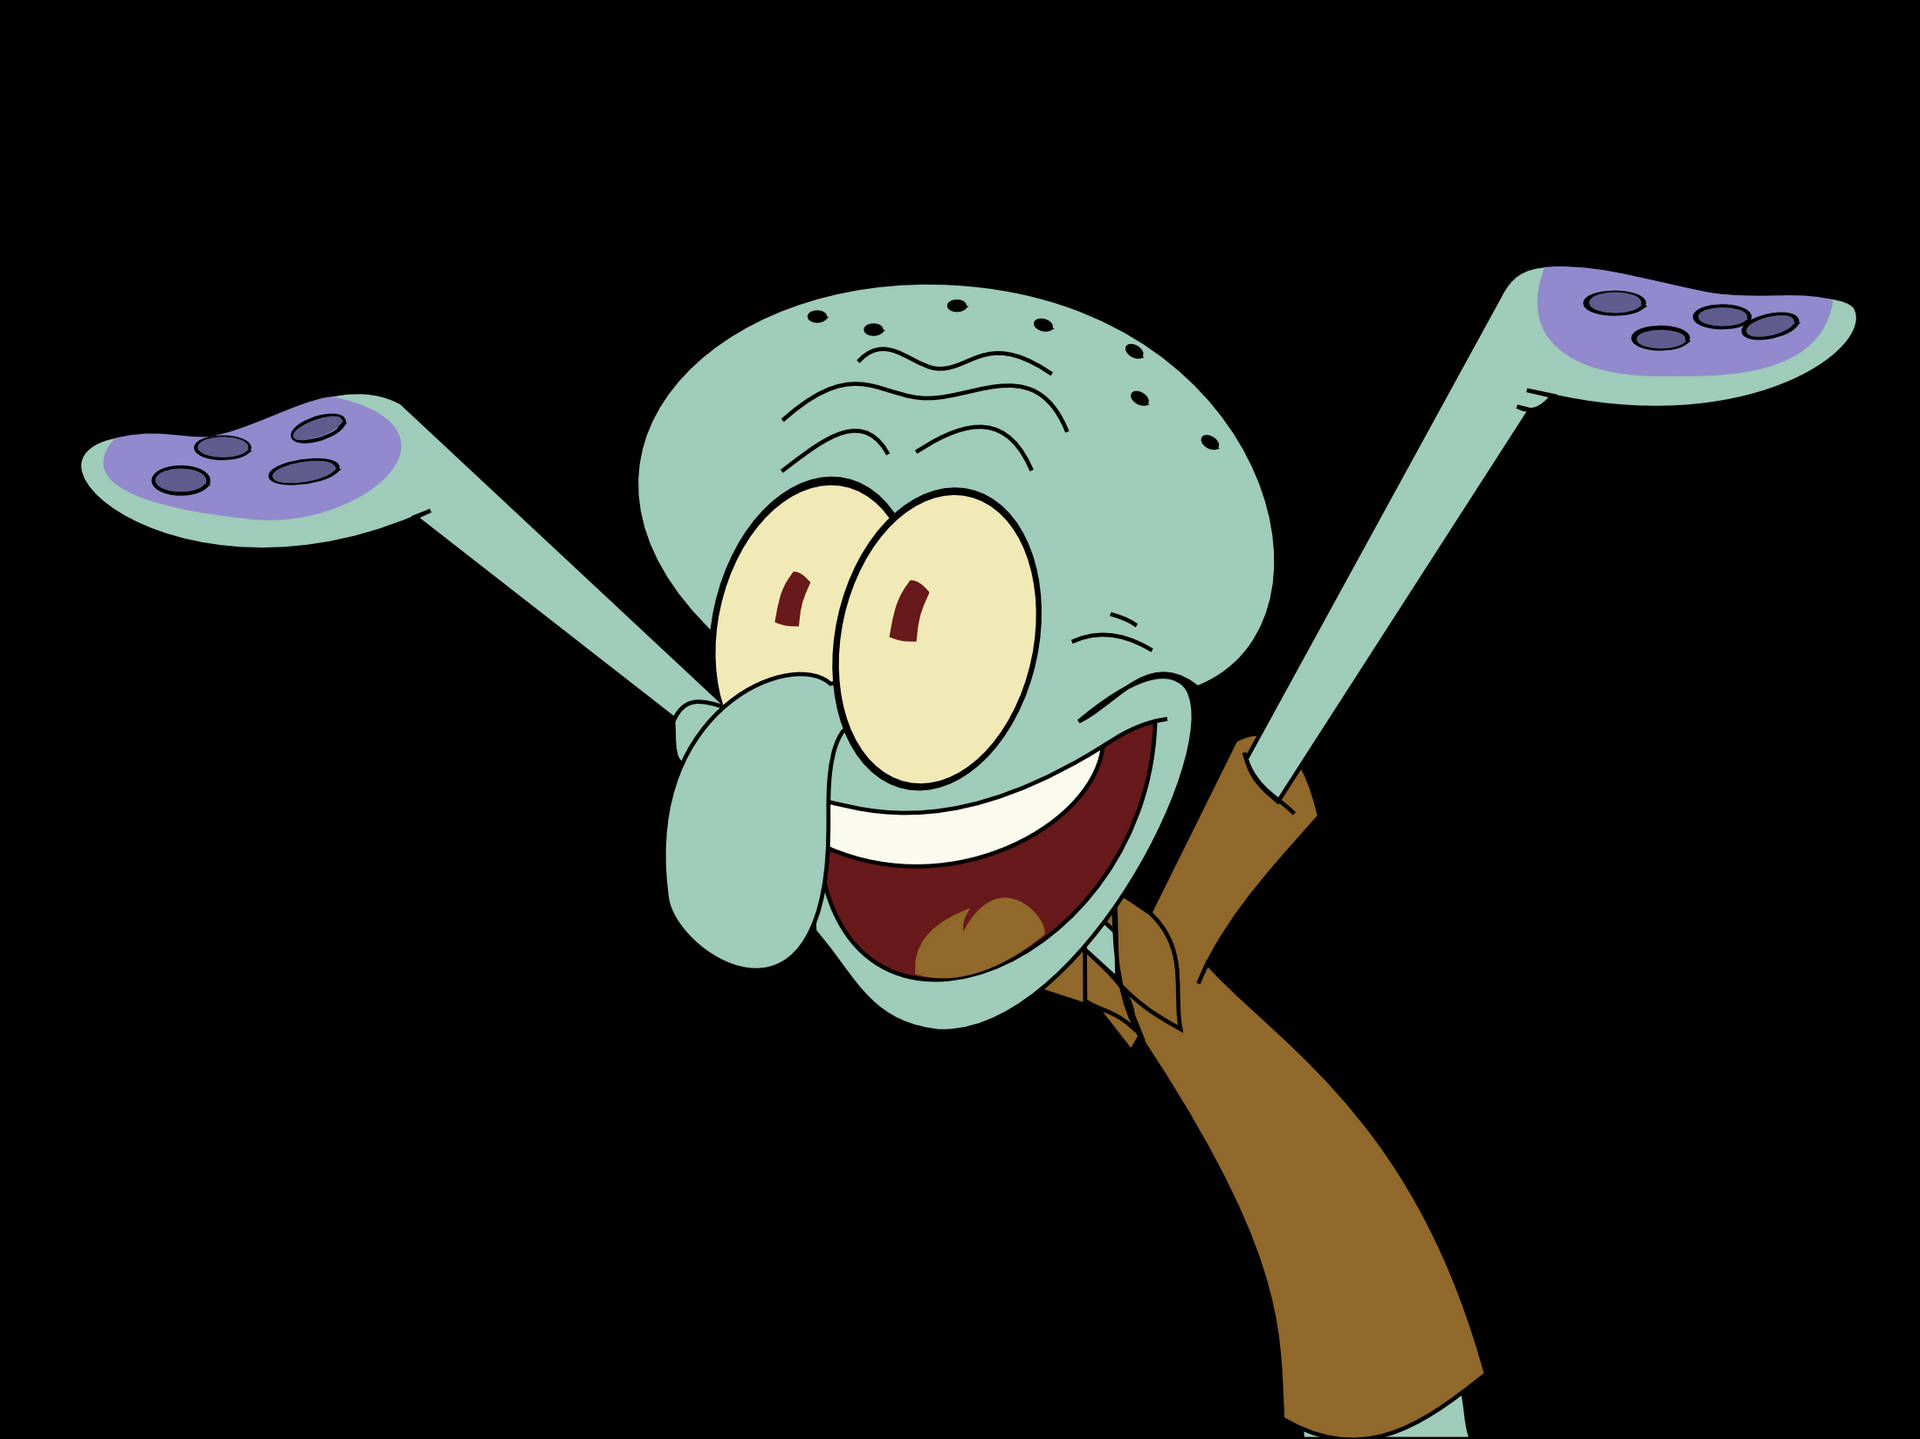 Squidward Tentacles Cynical Character